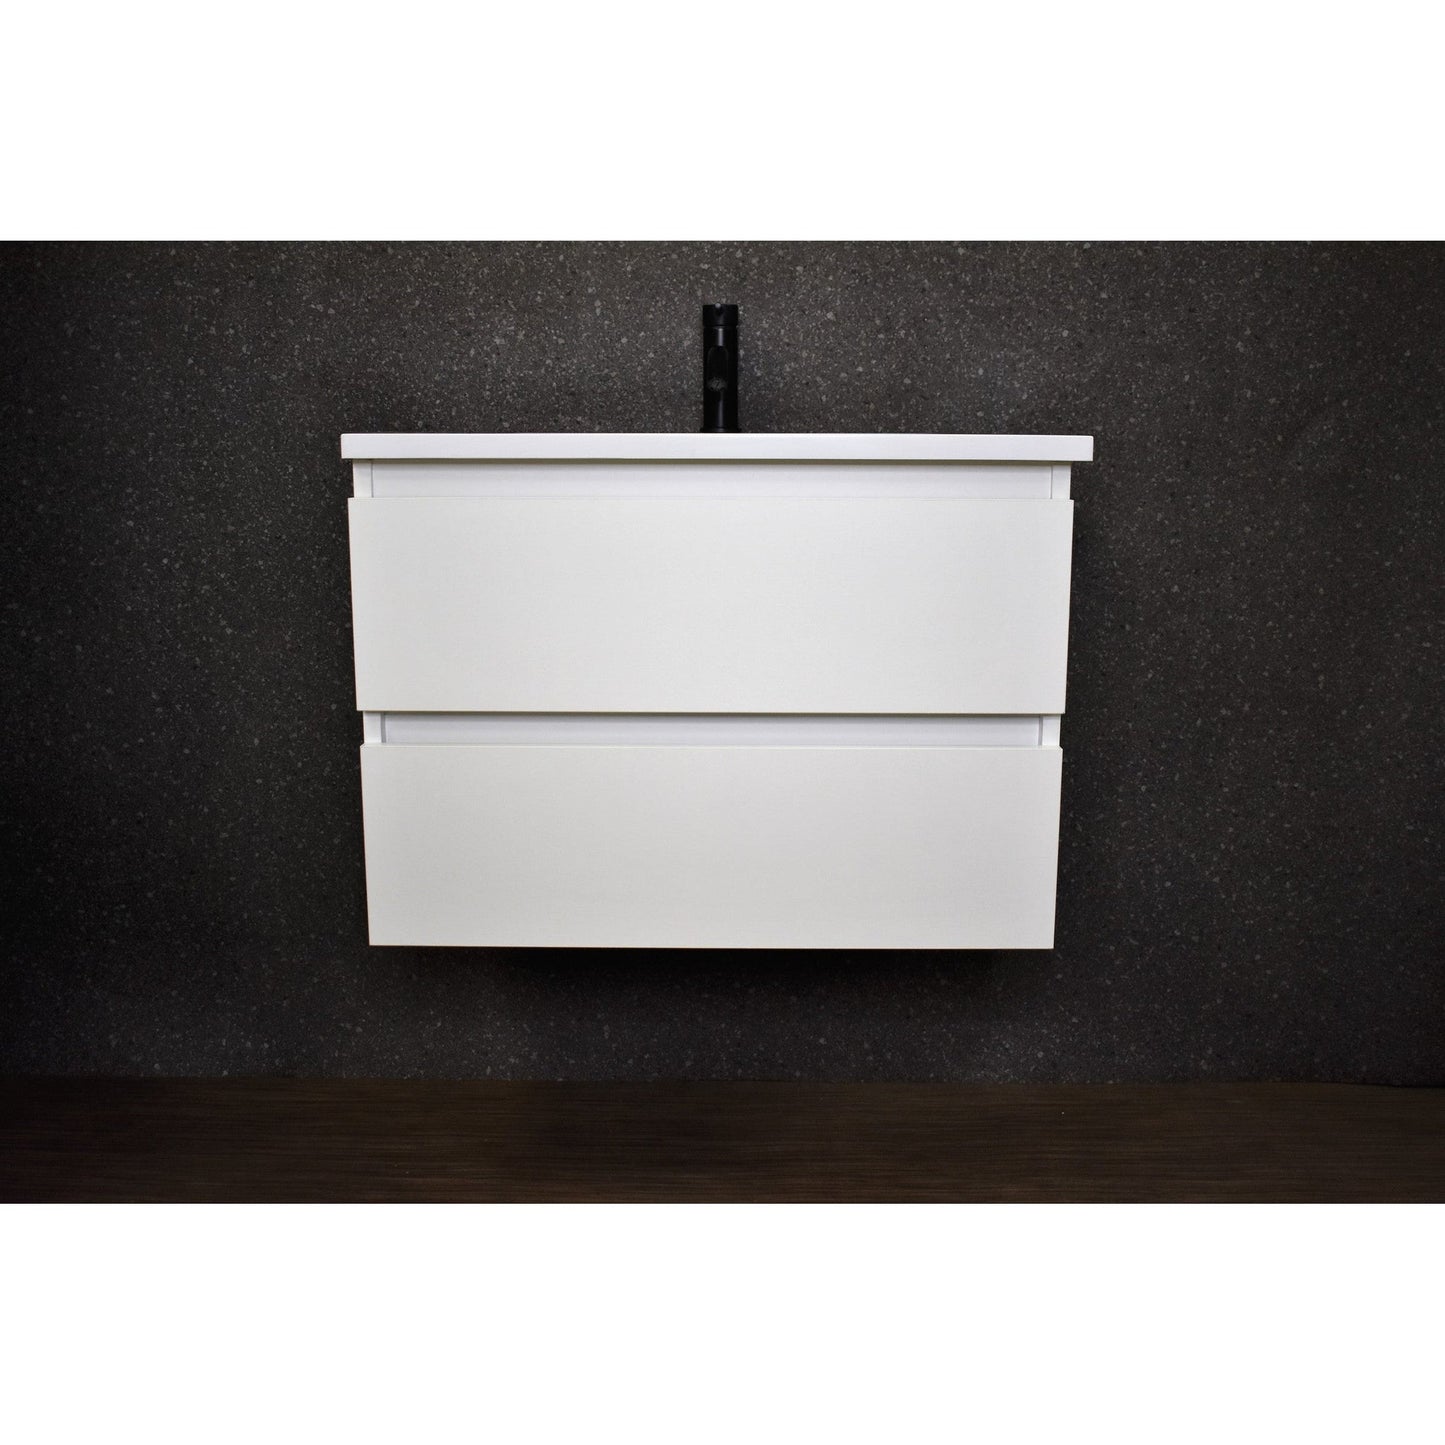 Volpa USA Salt 24" x 20" White Wall-Mounted Floating Bathroom Vanity With Drawers, Acrylic Top and Integrated Acrylic Sink